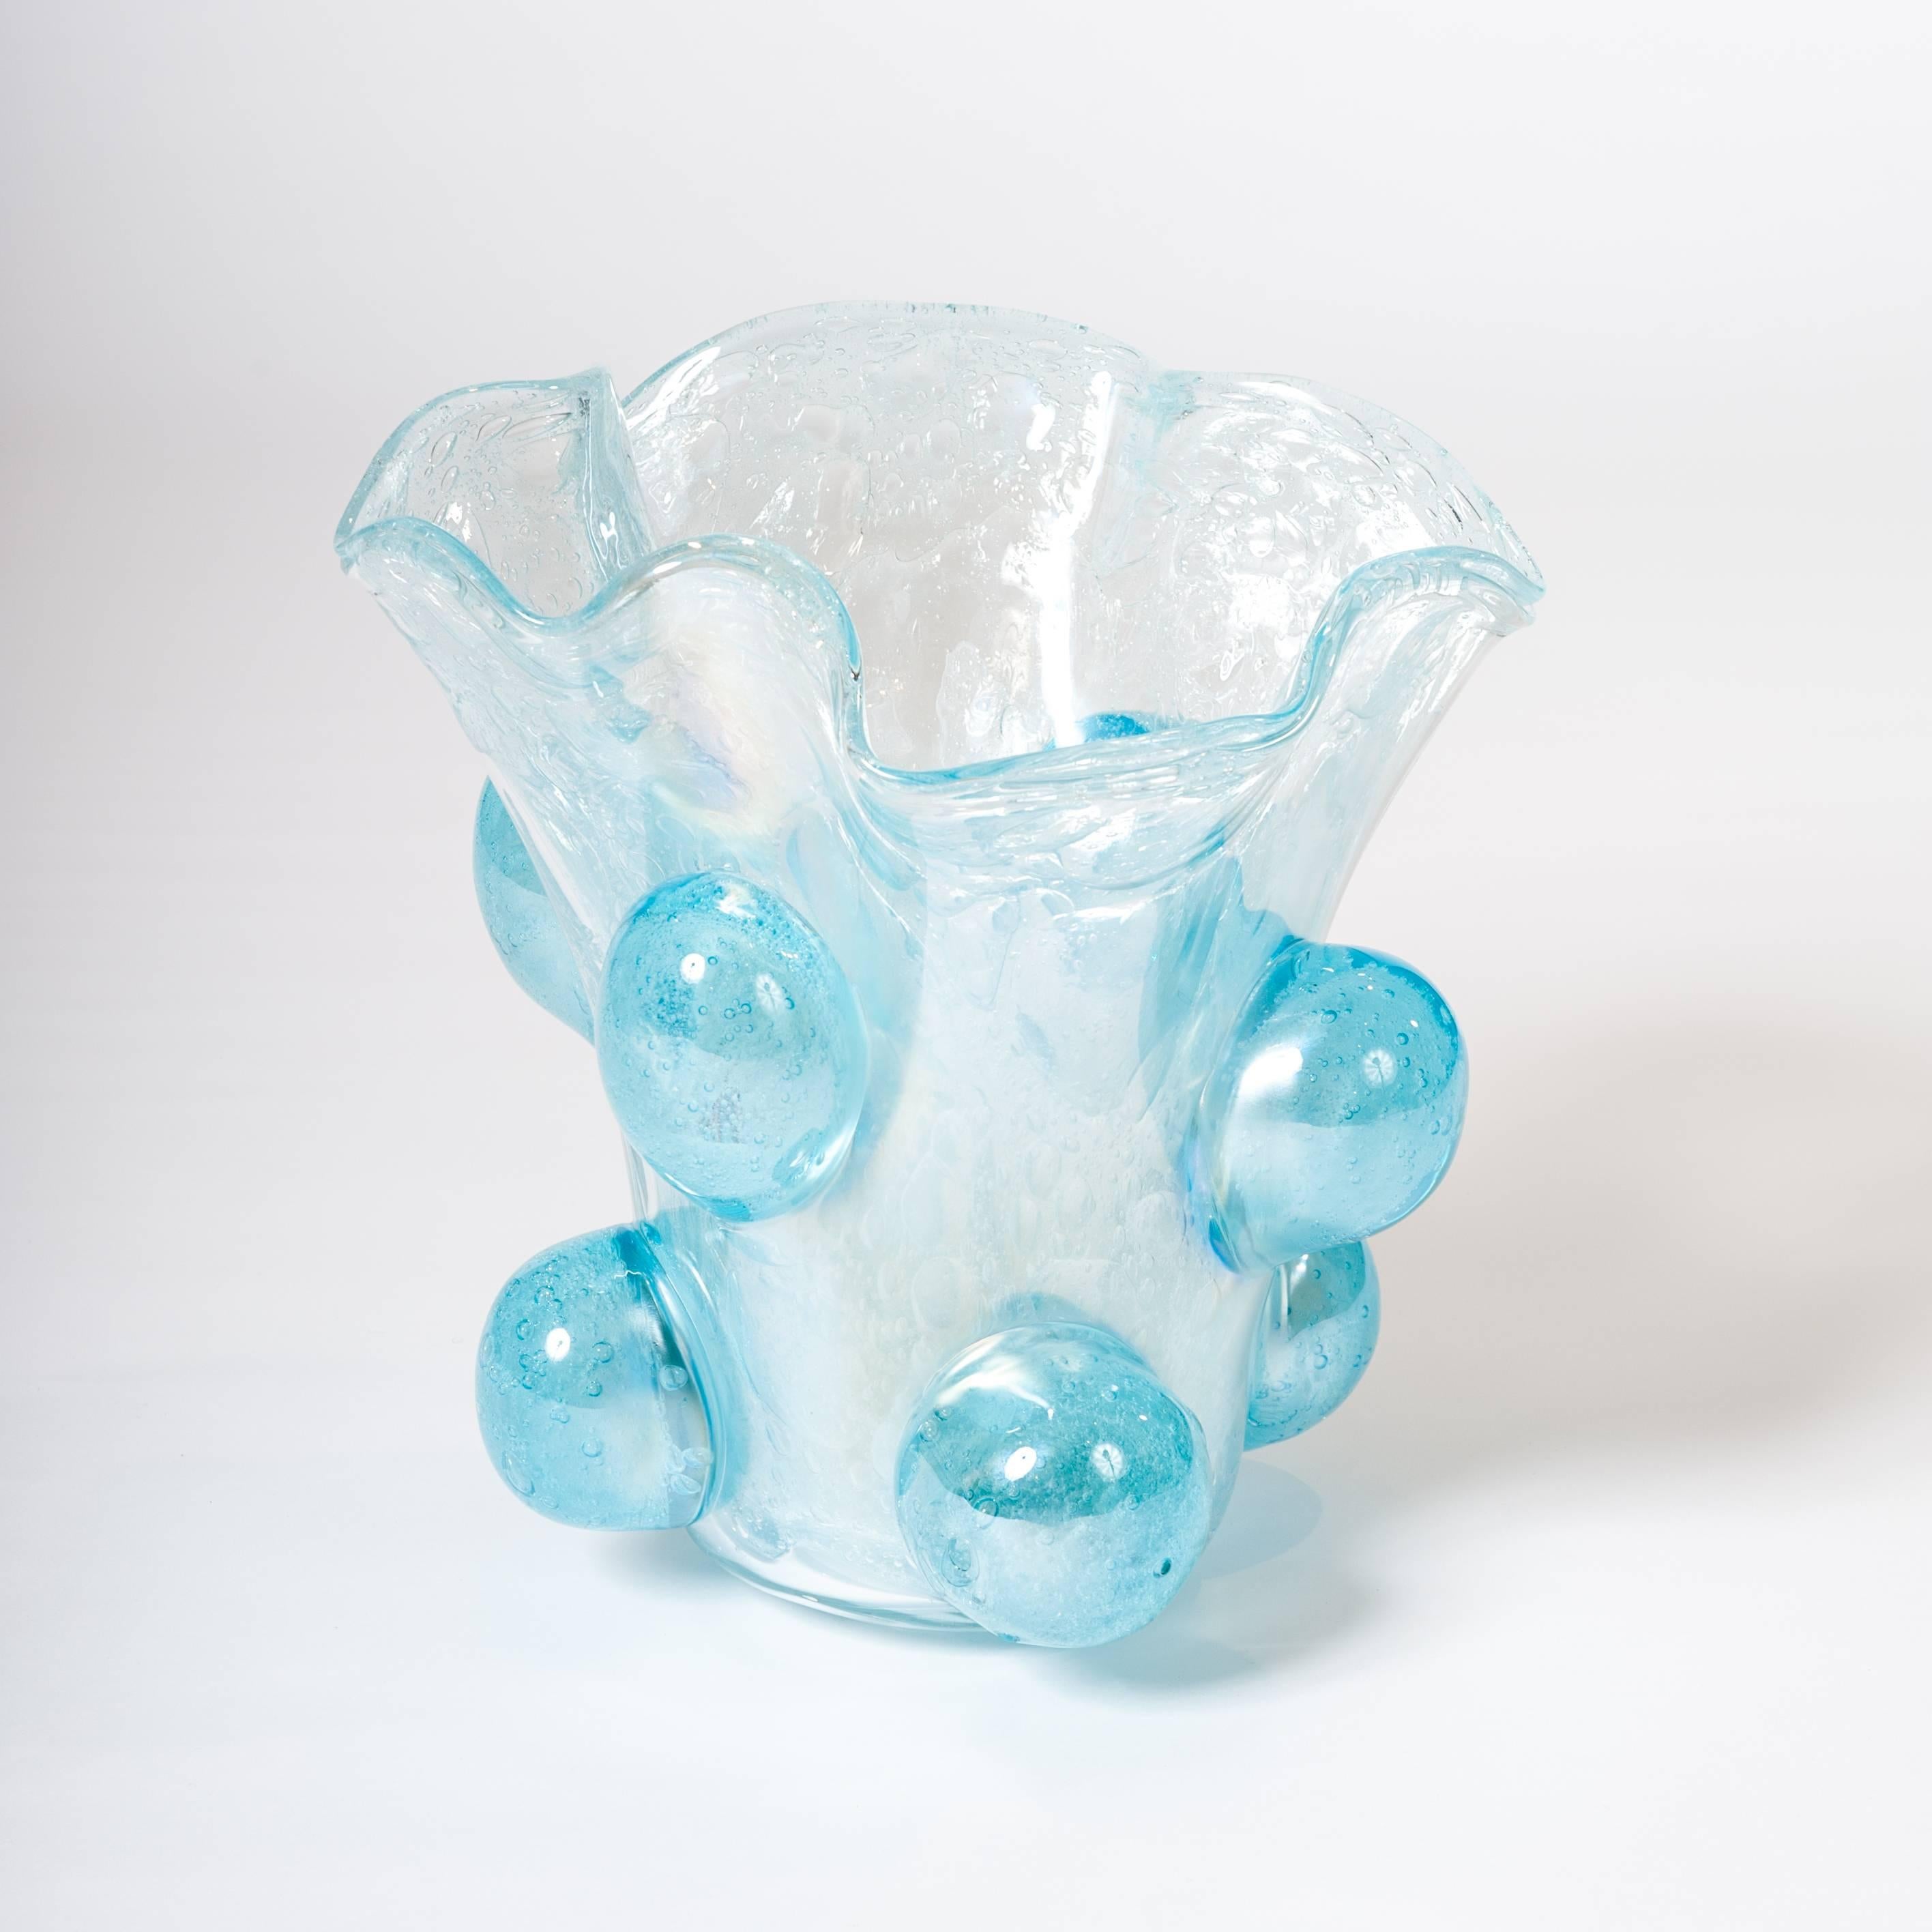 Modern Italian Murano glass vase turquoise colored with surreal impression.
The wavy shaped orifice, the small different air bubbles inside the glass body and the enormous glass bubbles outside on the surface turn into a sculpture.
The fantastic